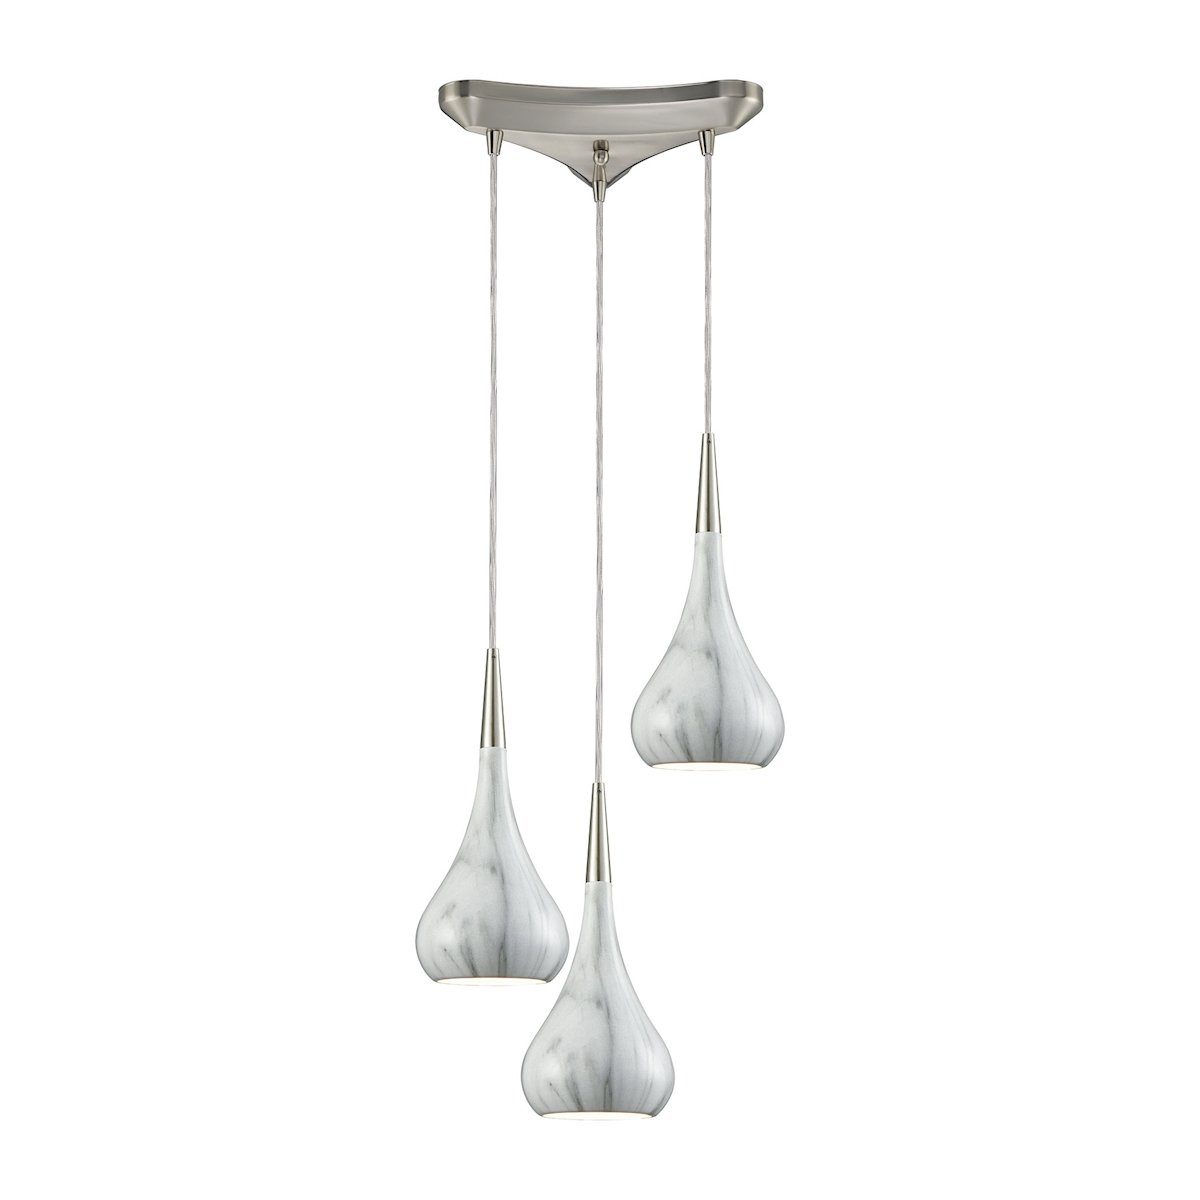 Lindsey 3 Light Triangle Pan Fixture In Satin Nickel With Marble Print Shade Ceiling Elk Lighting 